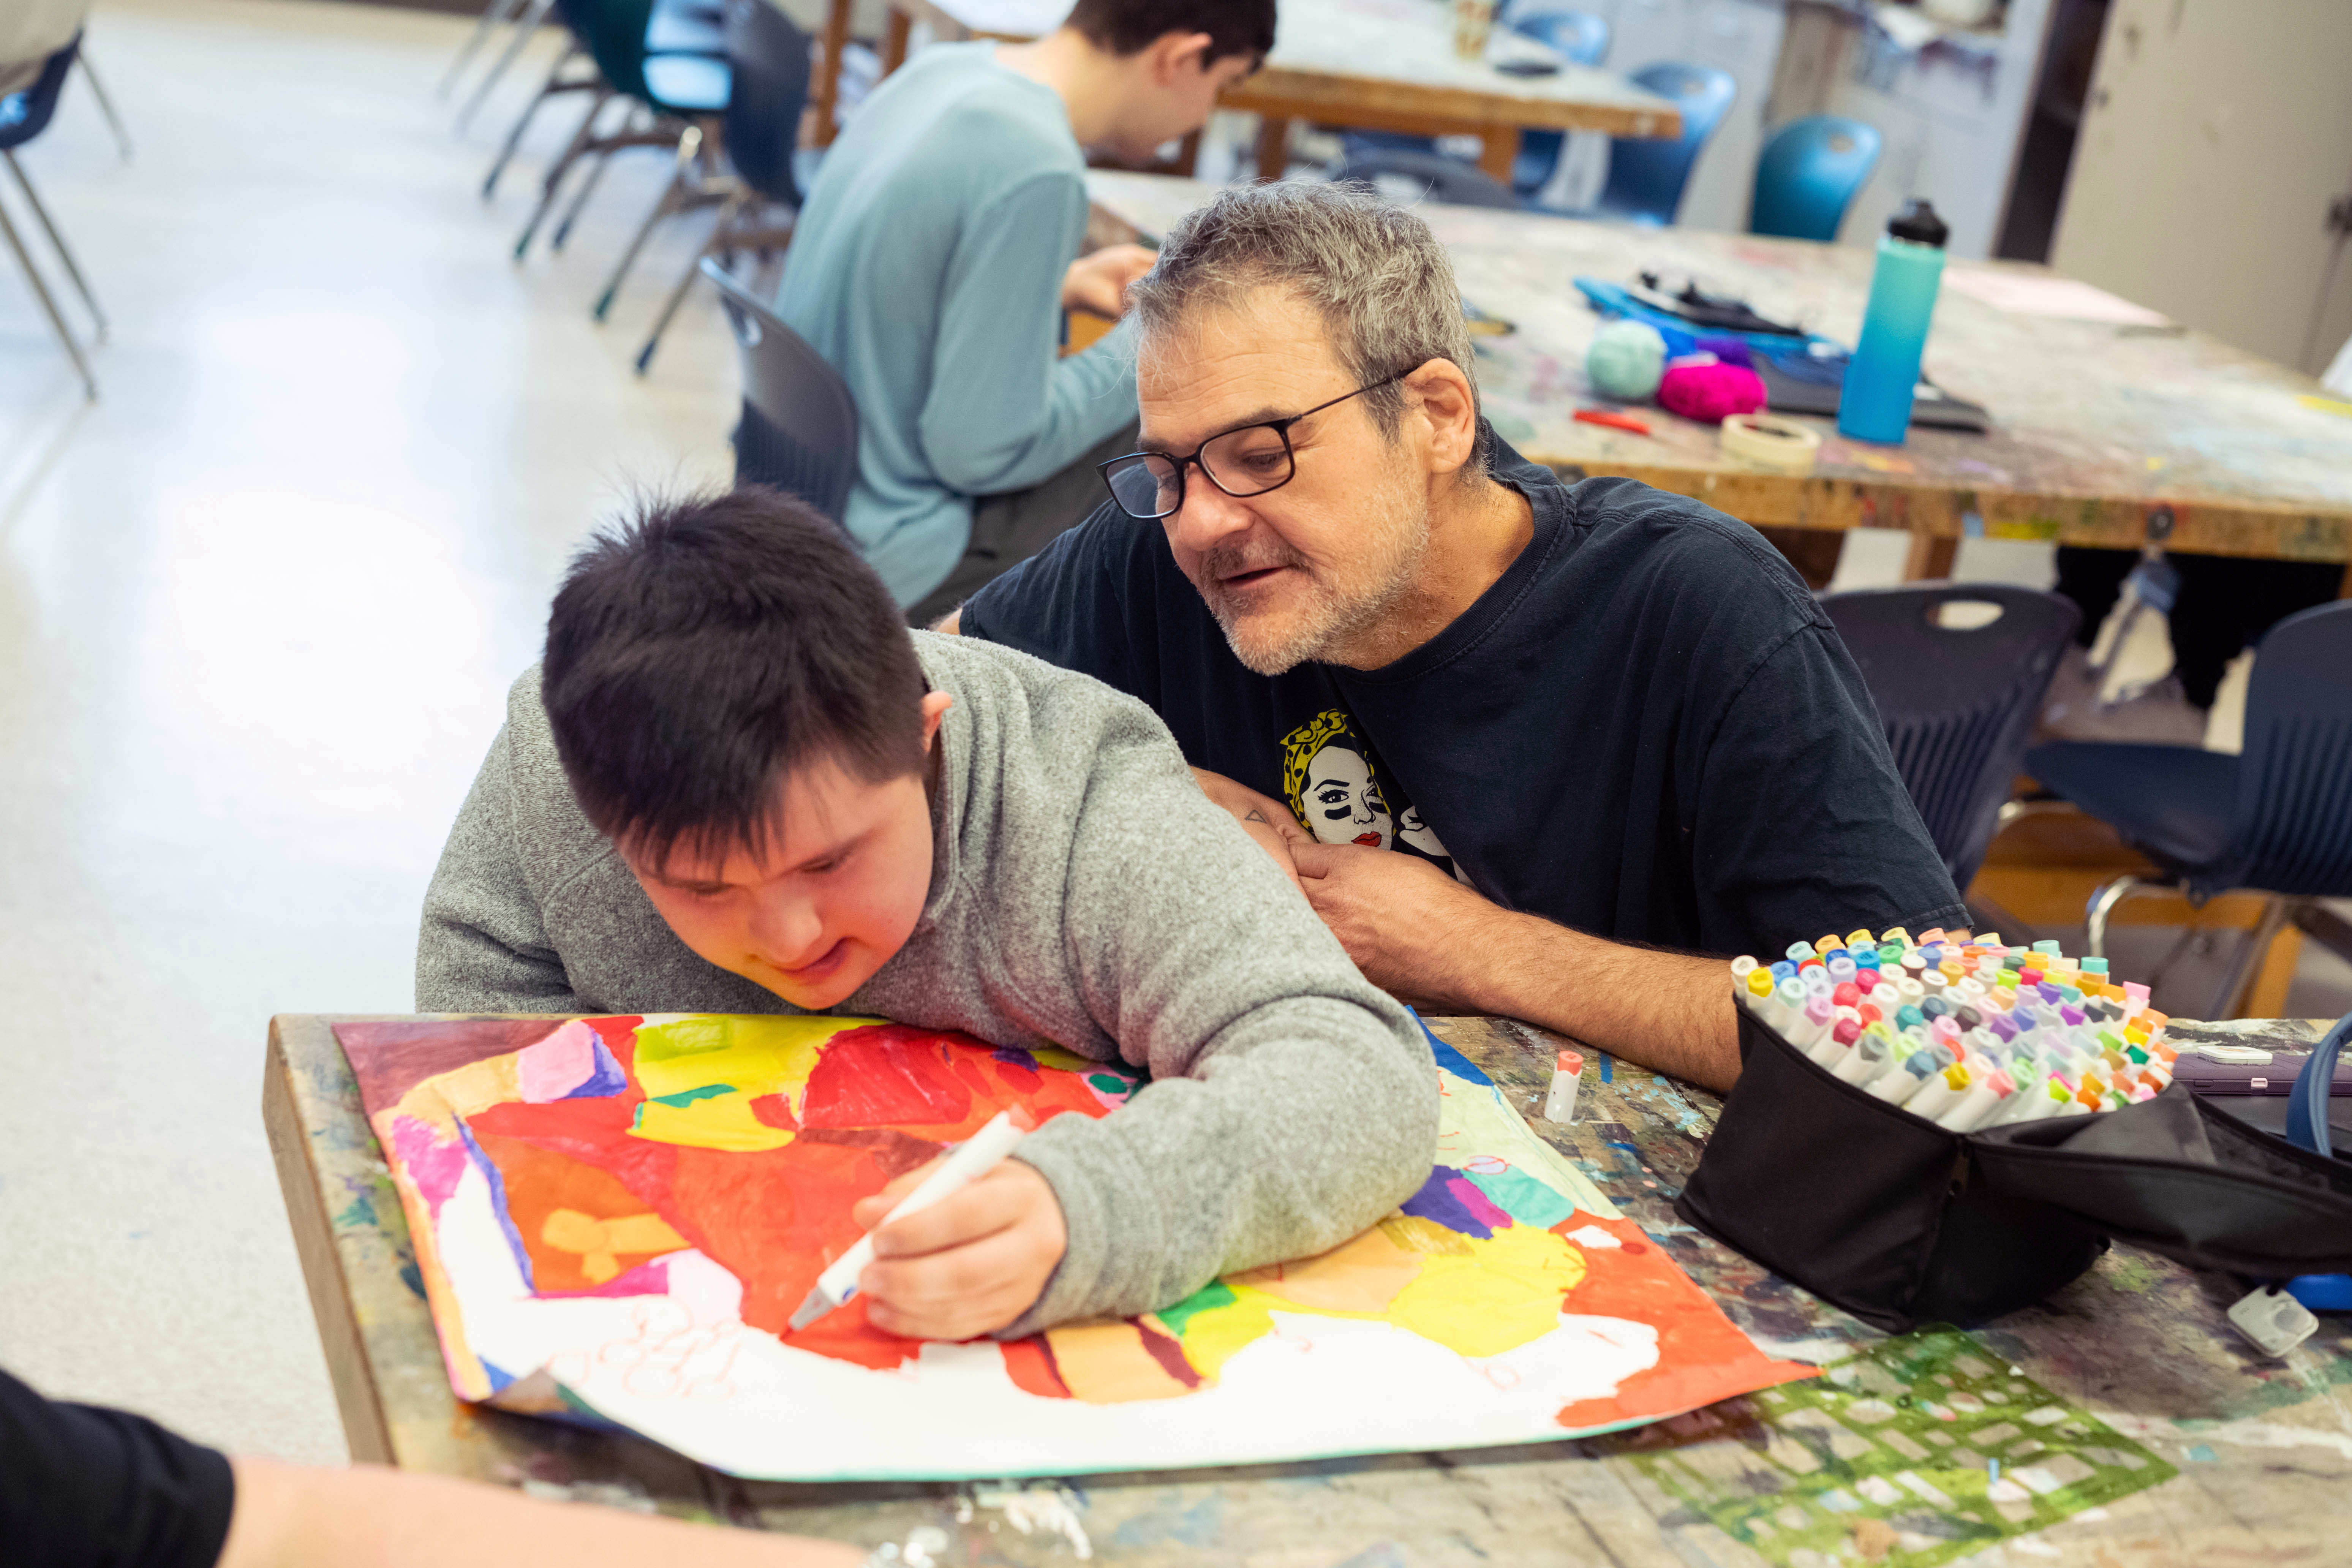 Teacher Matt Ravenstahl looks closely over student Frank Hickok's shoulder as he draws a pattern with colorful markers.